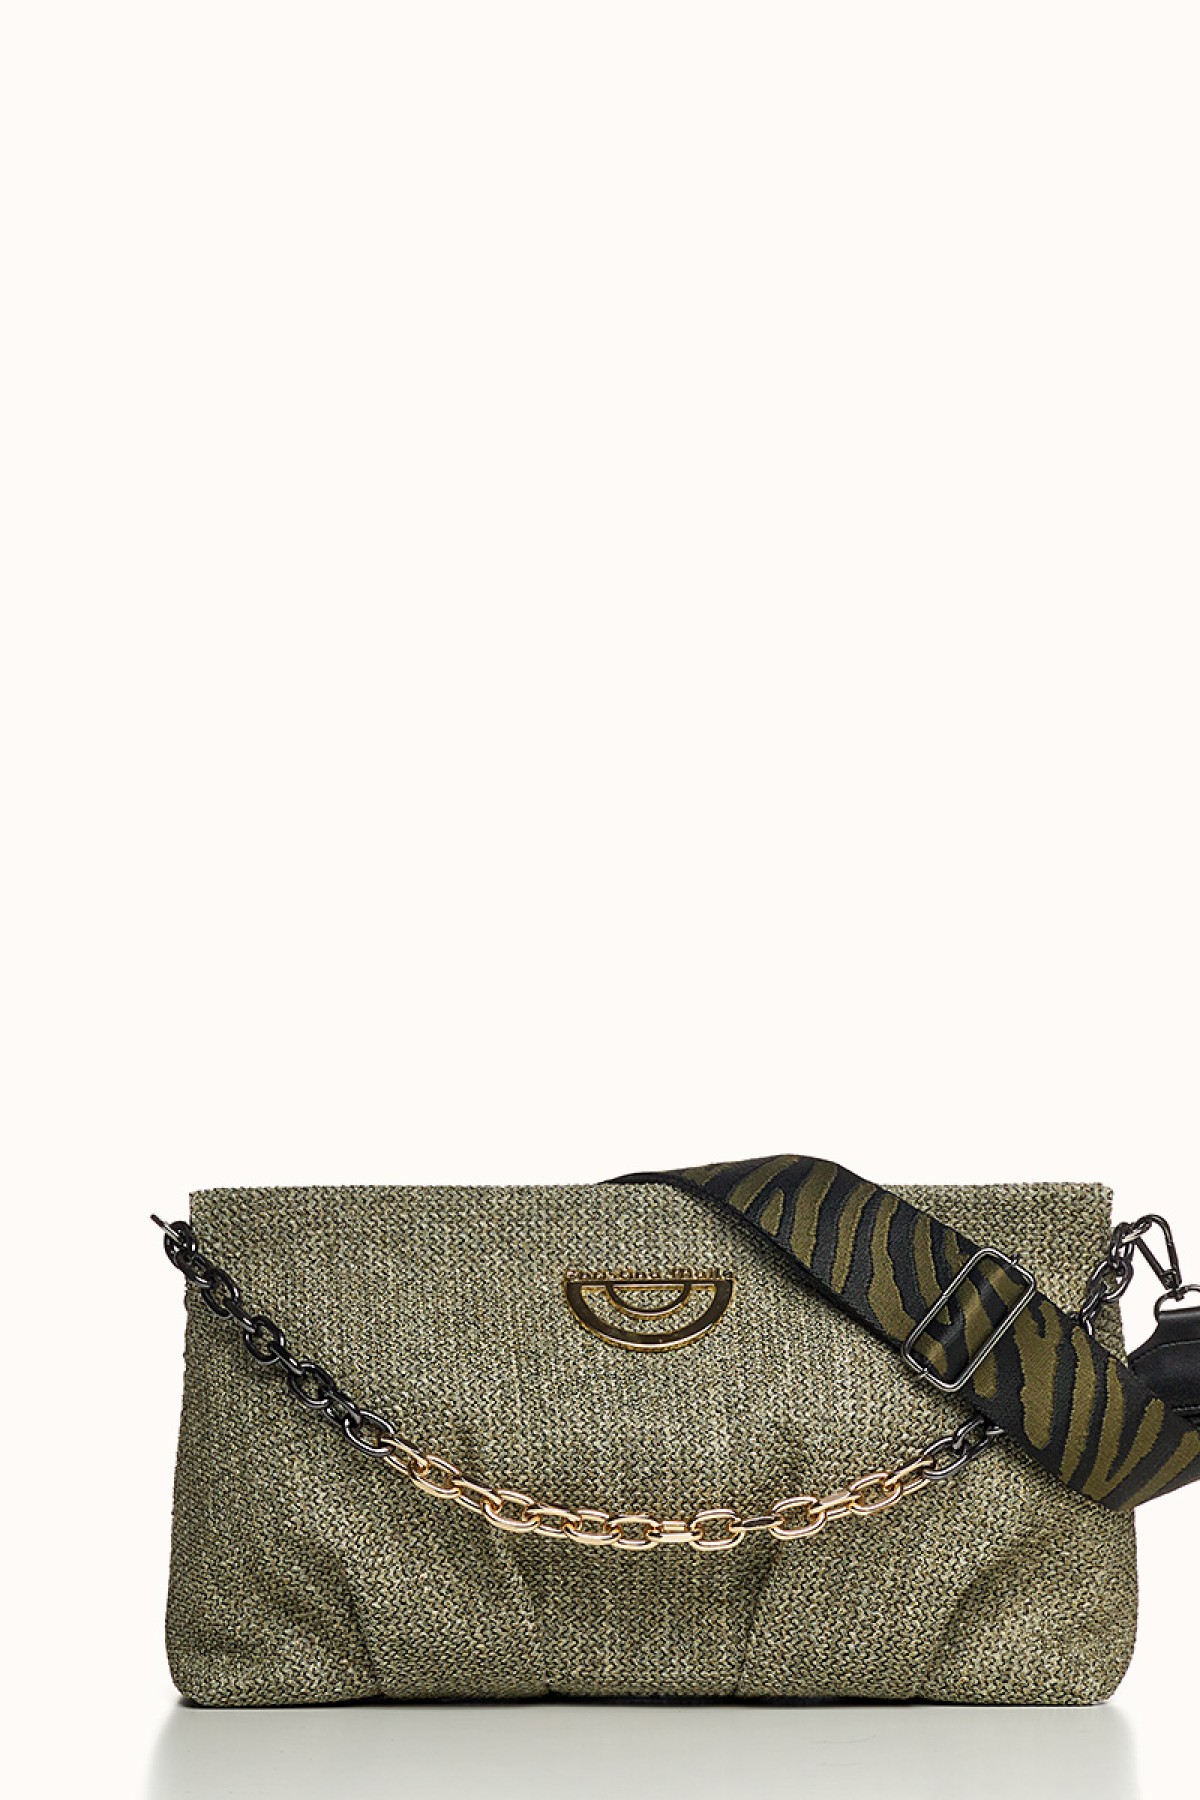 OLIVE STRAW BAGS